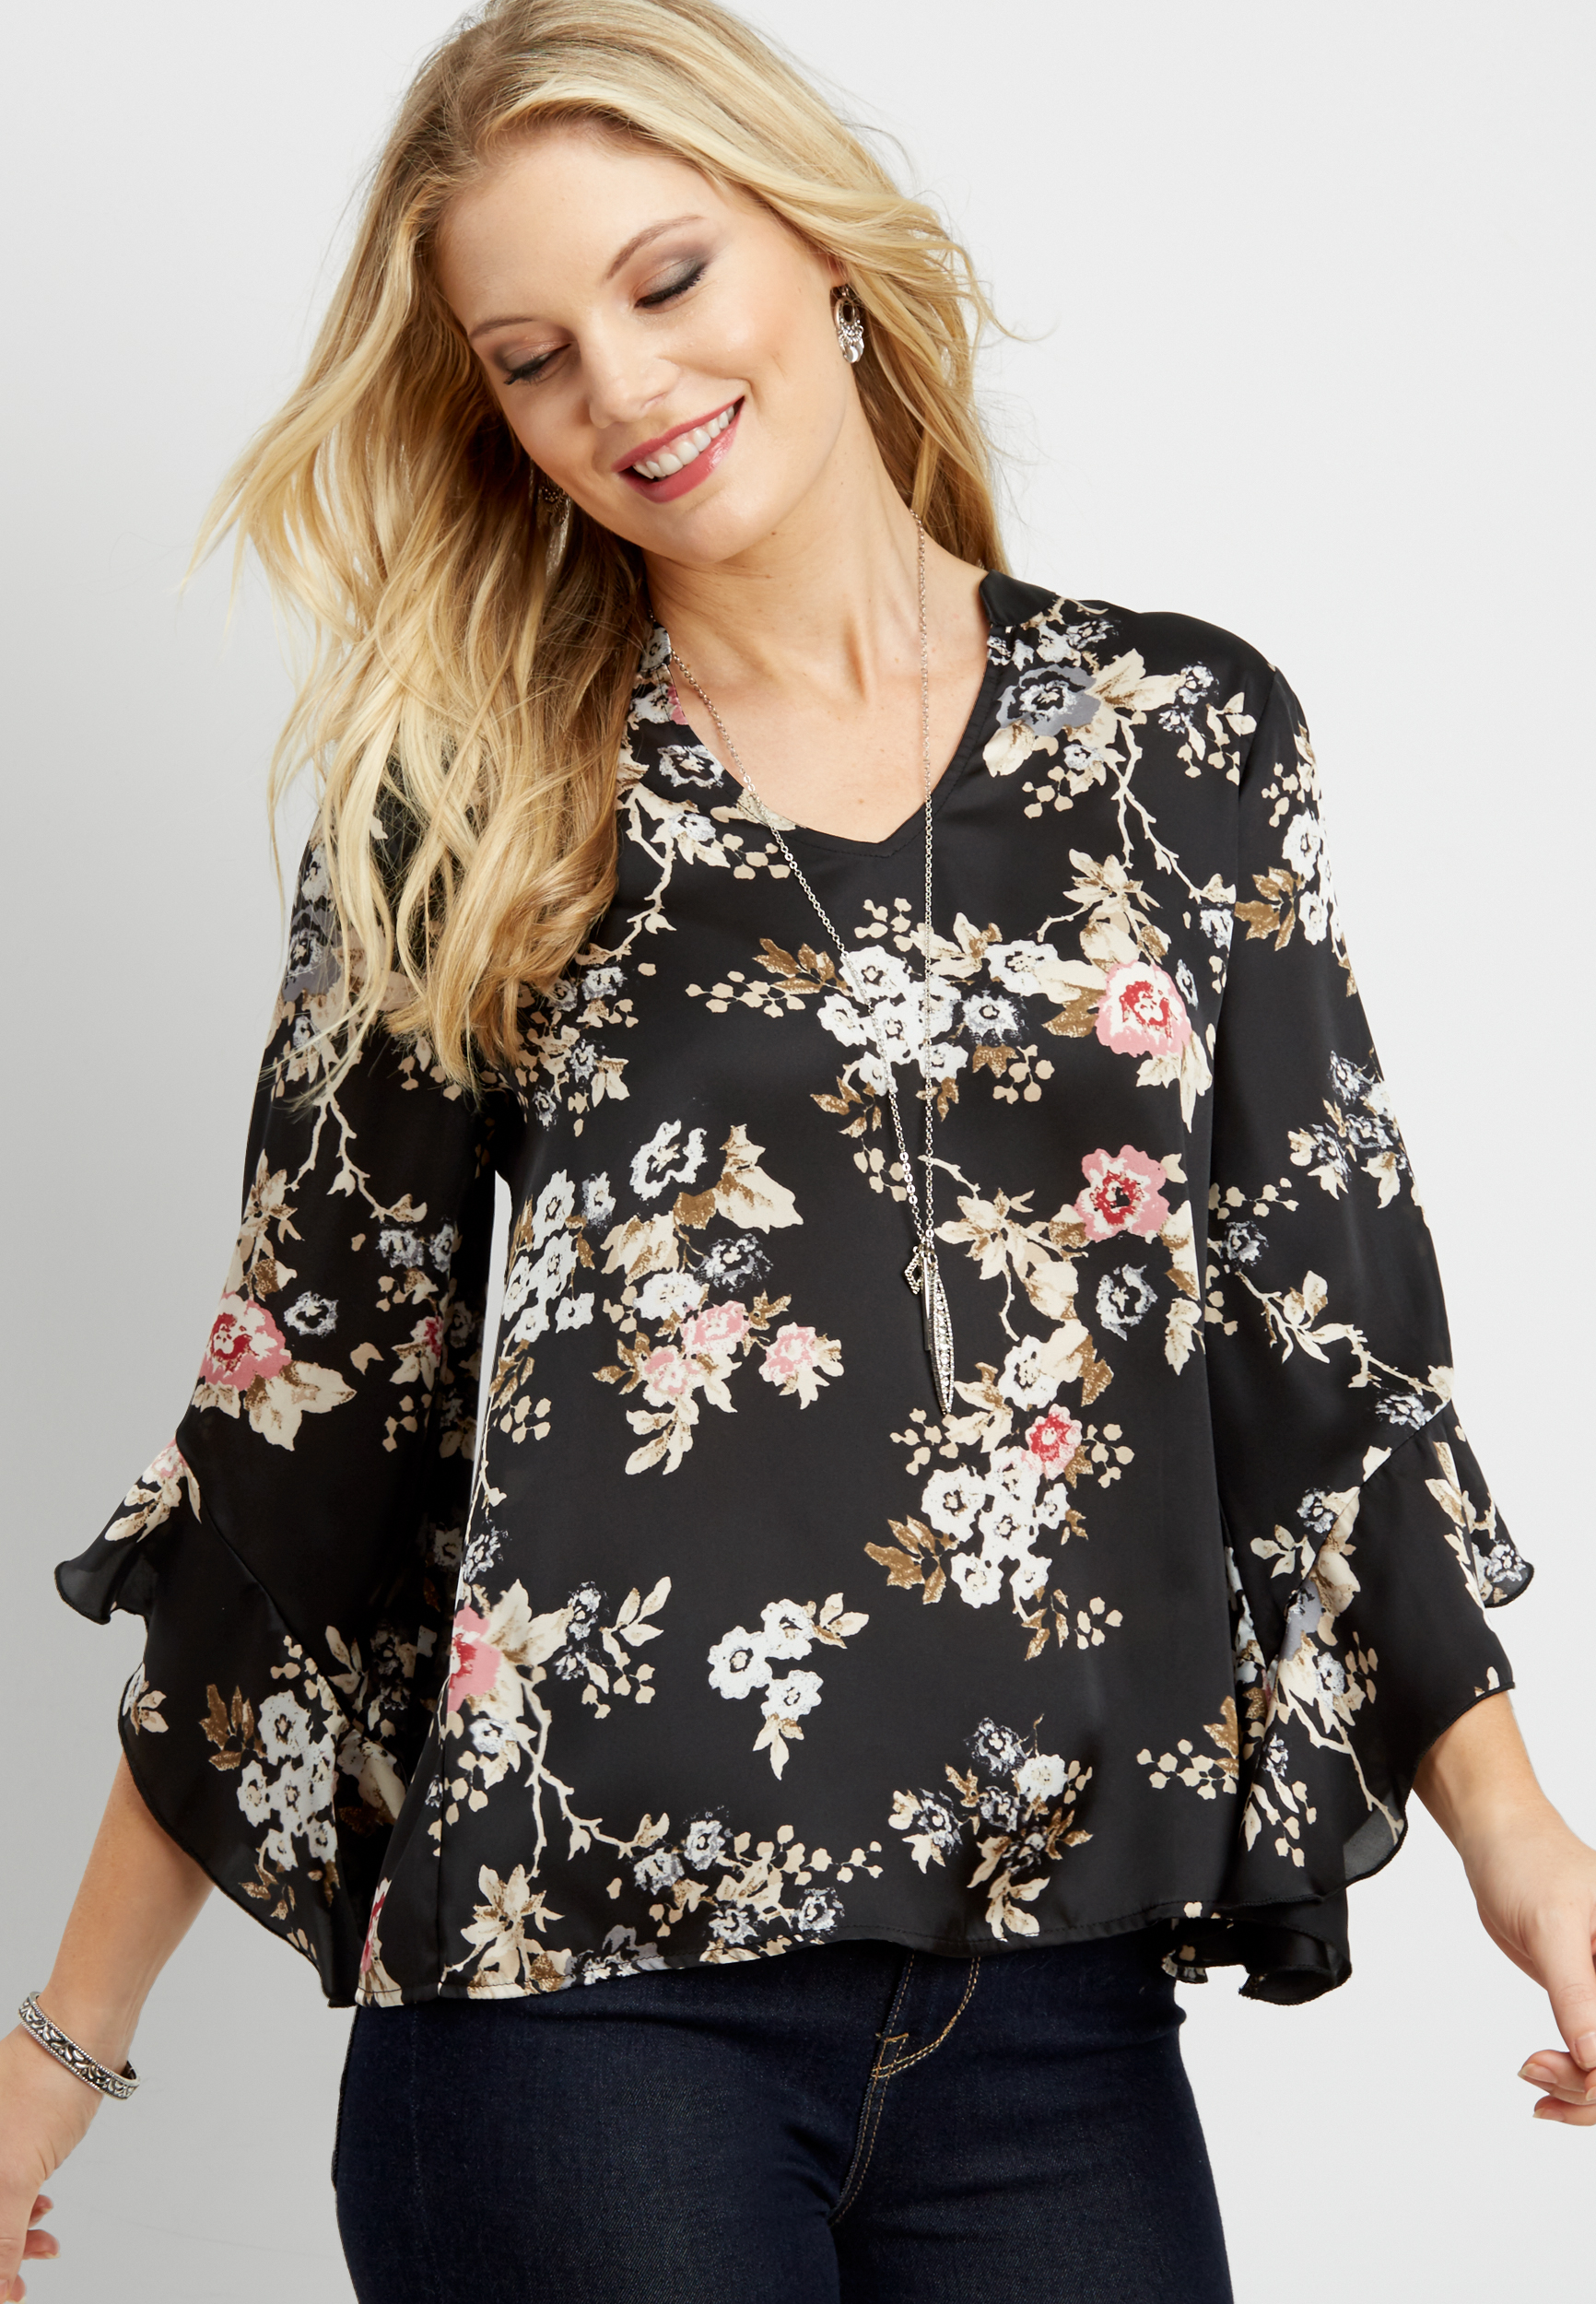 OLD floral print satin blouse with ruffled sleeves | maurices